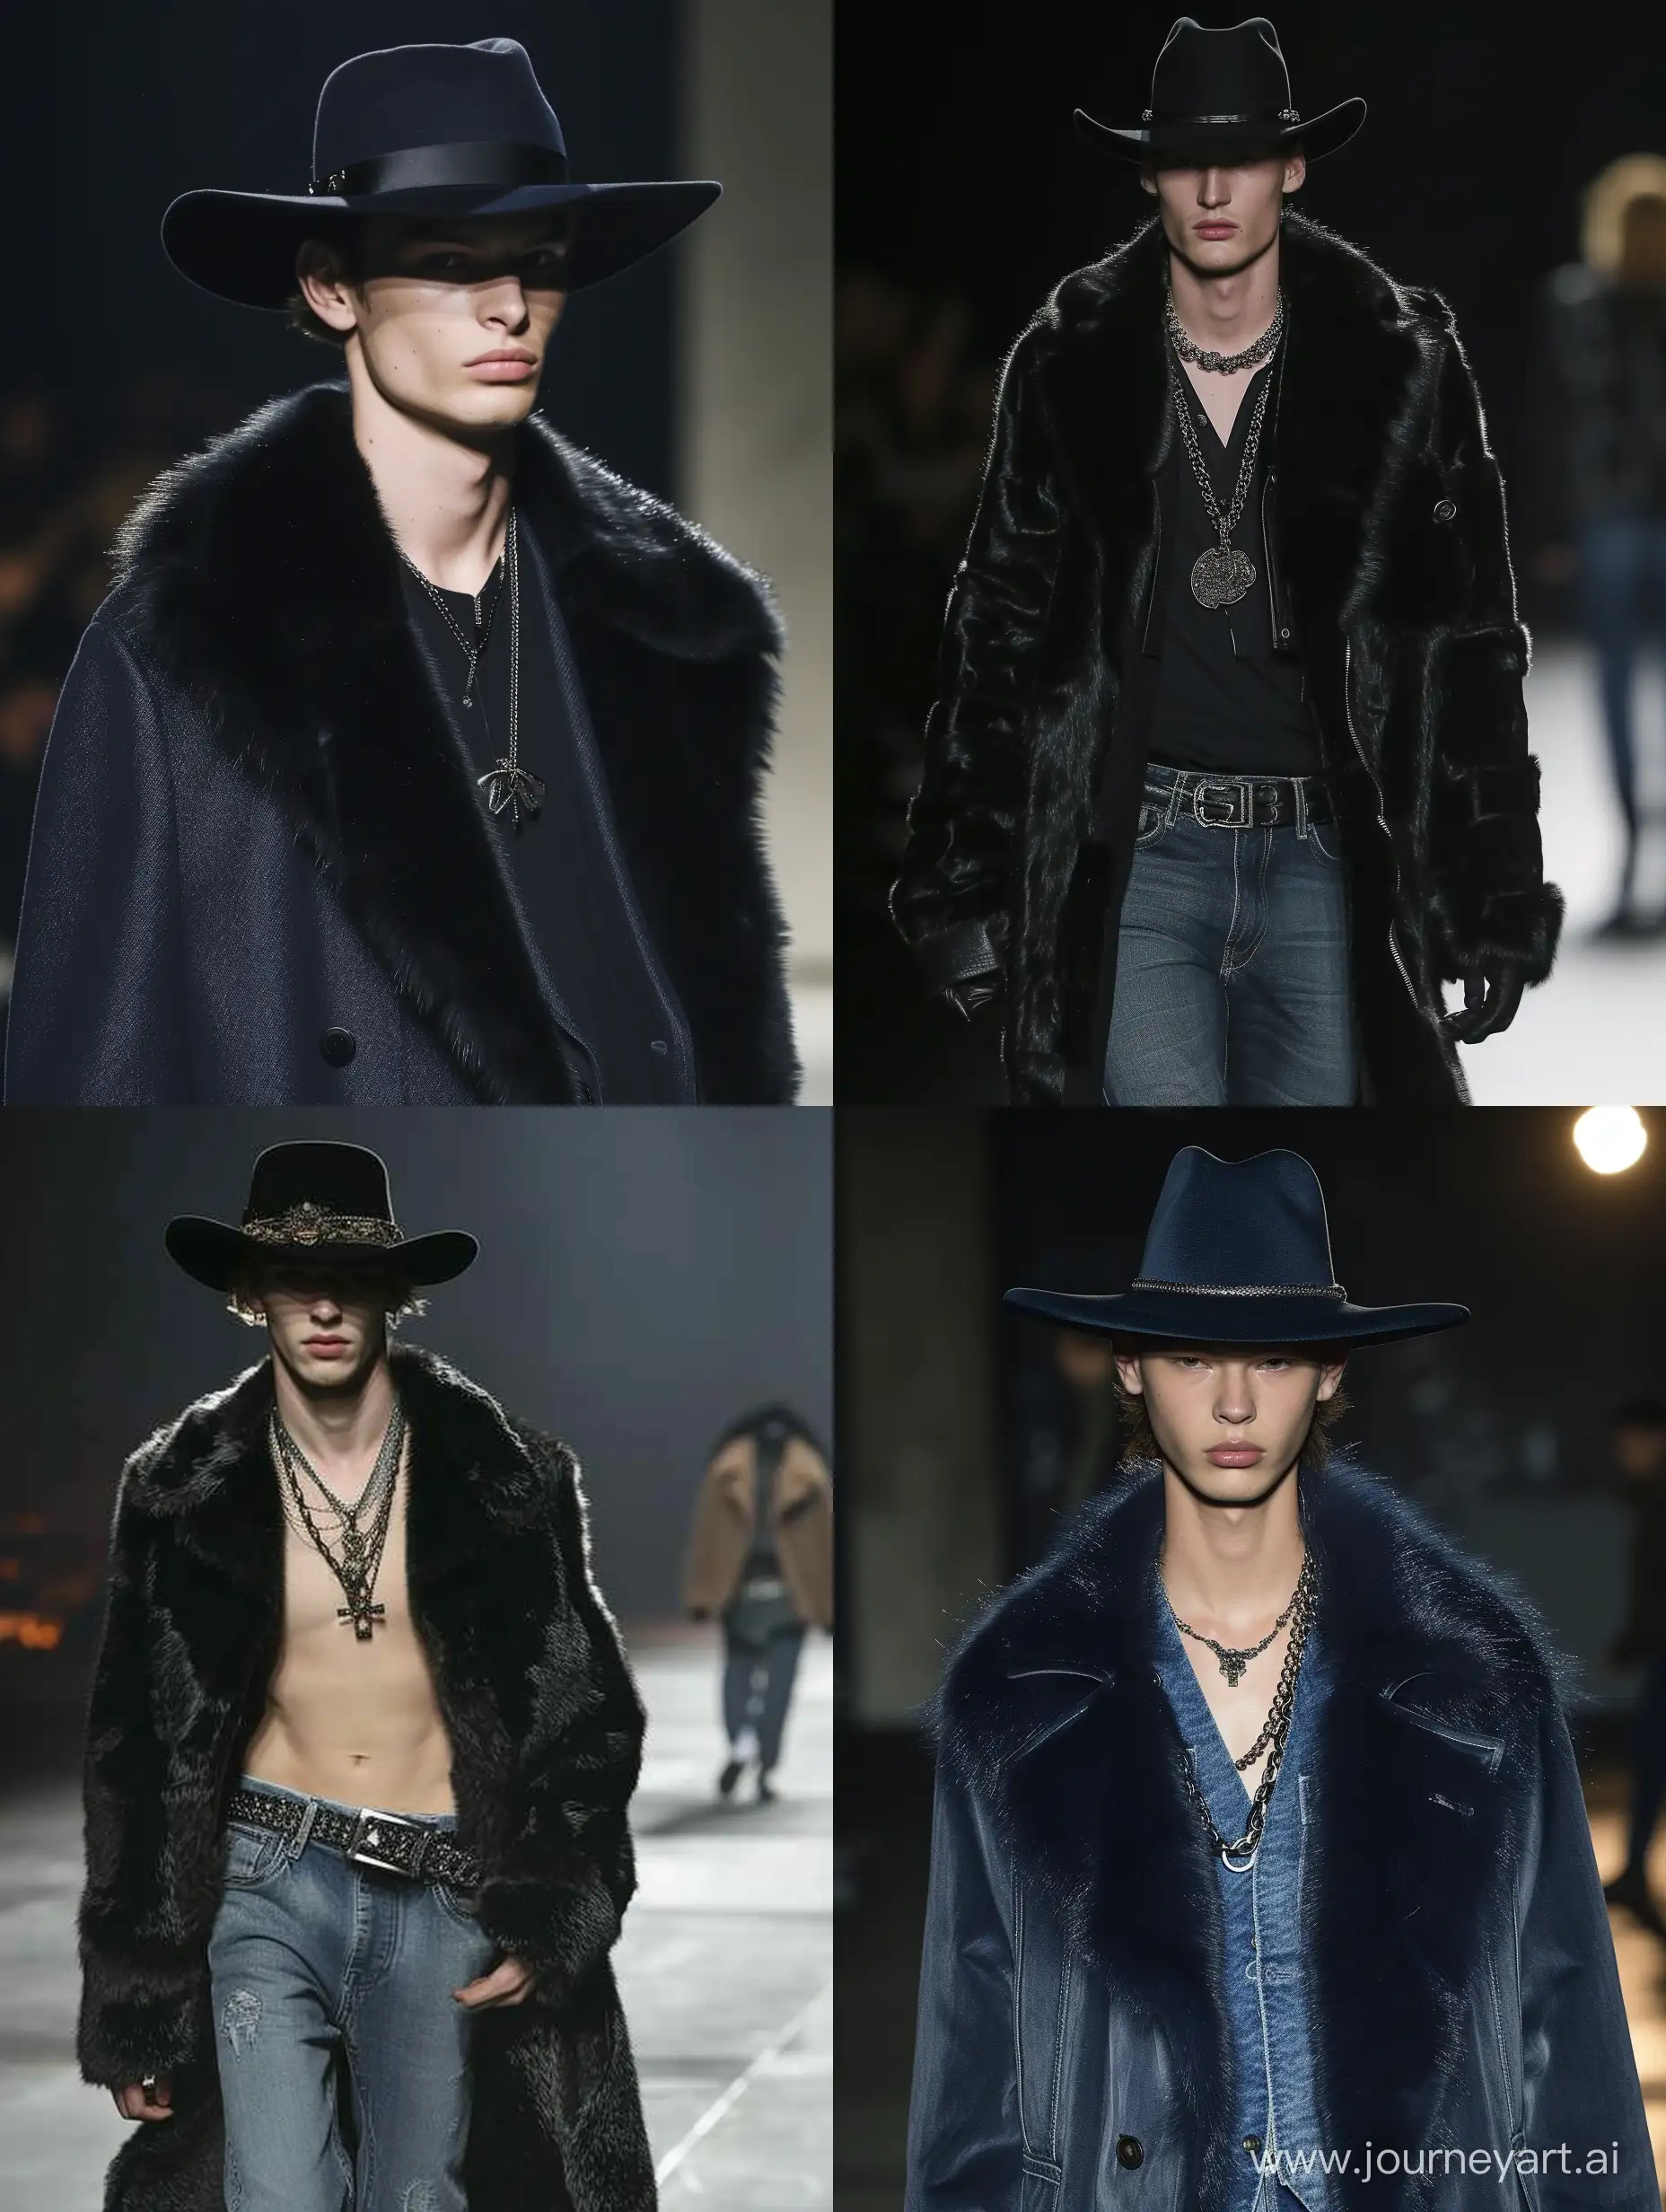 Fashionable-Male-Model-Showcasing-Elegant-Runway-Attire-with-Vison-Mink-and-Jewelry